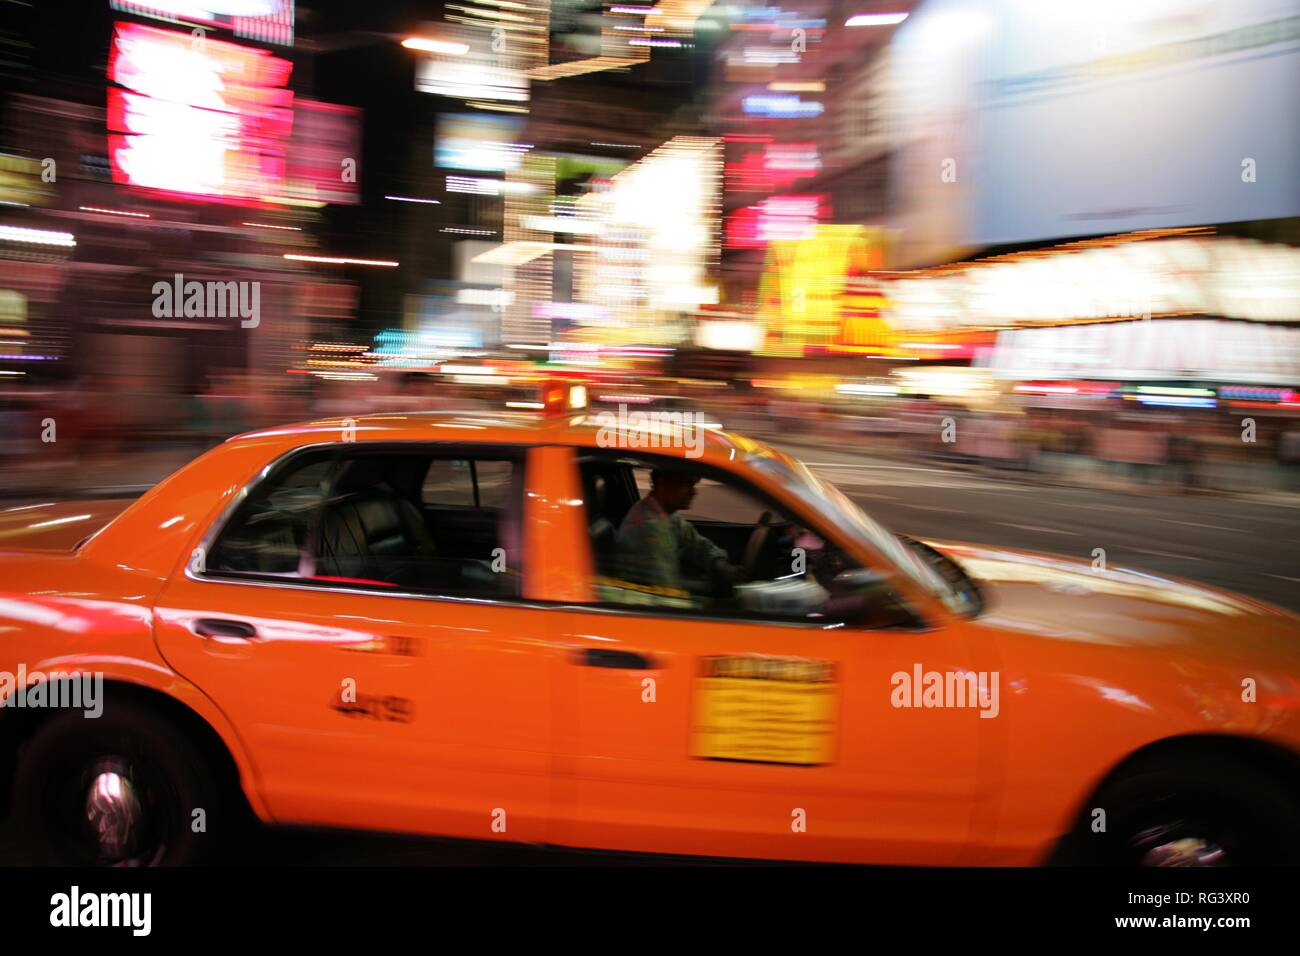 USA, United States of America, New York City: New Yorker Taxi, Yellow cab. Stock Photo